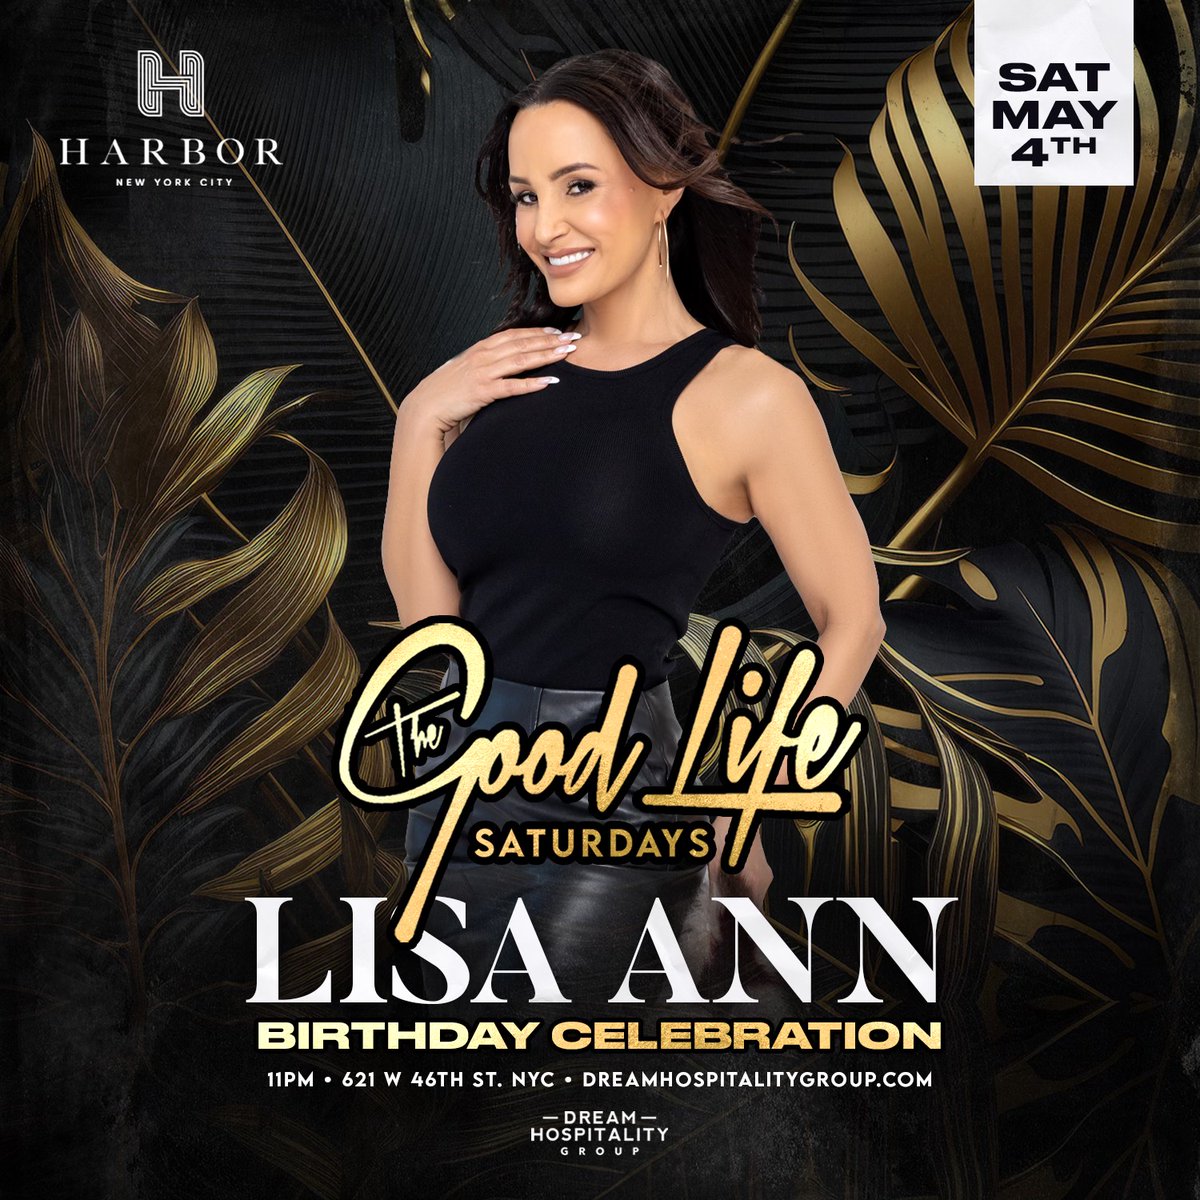 🍾 Let's pop some bottles & light up the night on May 4th at @Harbornightclub for MY #BIRTHDAY CELEBRATION! Don't miss out on the fun! 🔥 #harbornyc #thereallisaann #birthdaybash